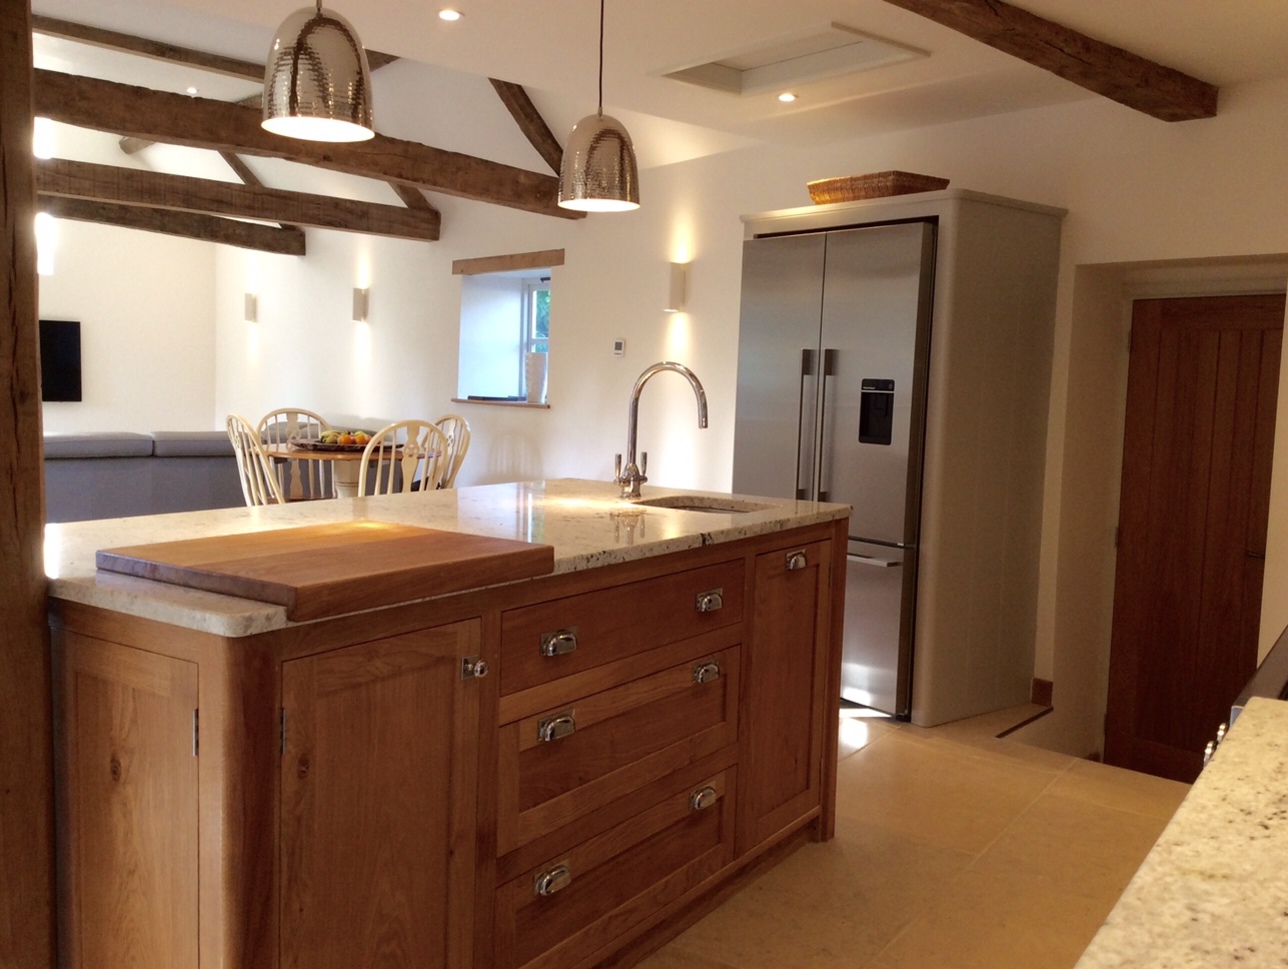 Individually designed island site, shaker style in solid oak.